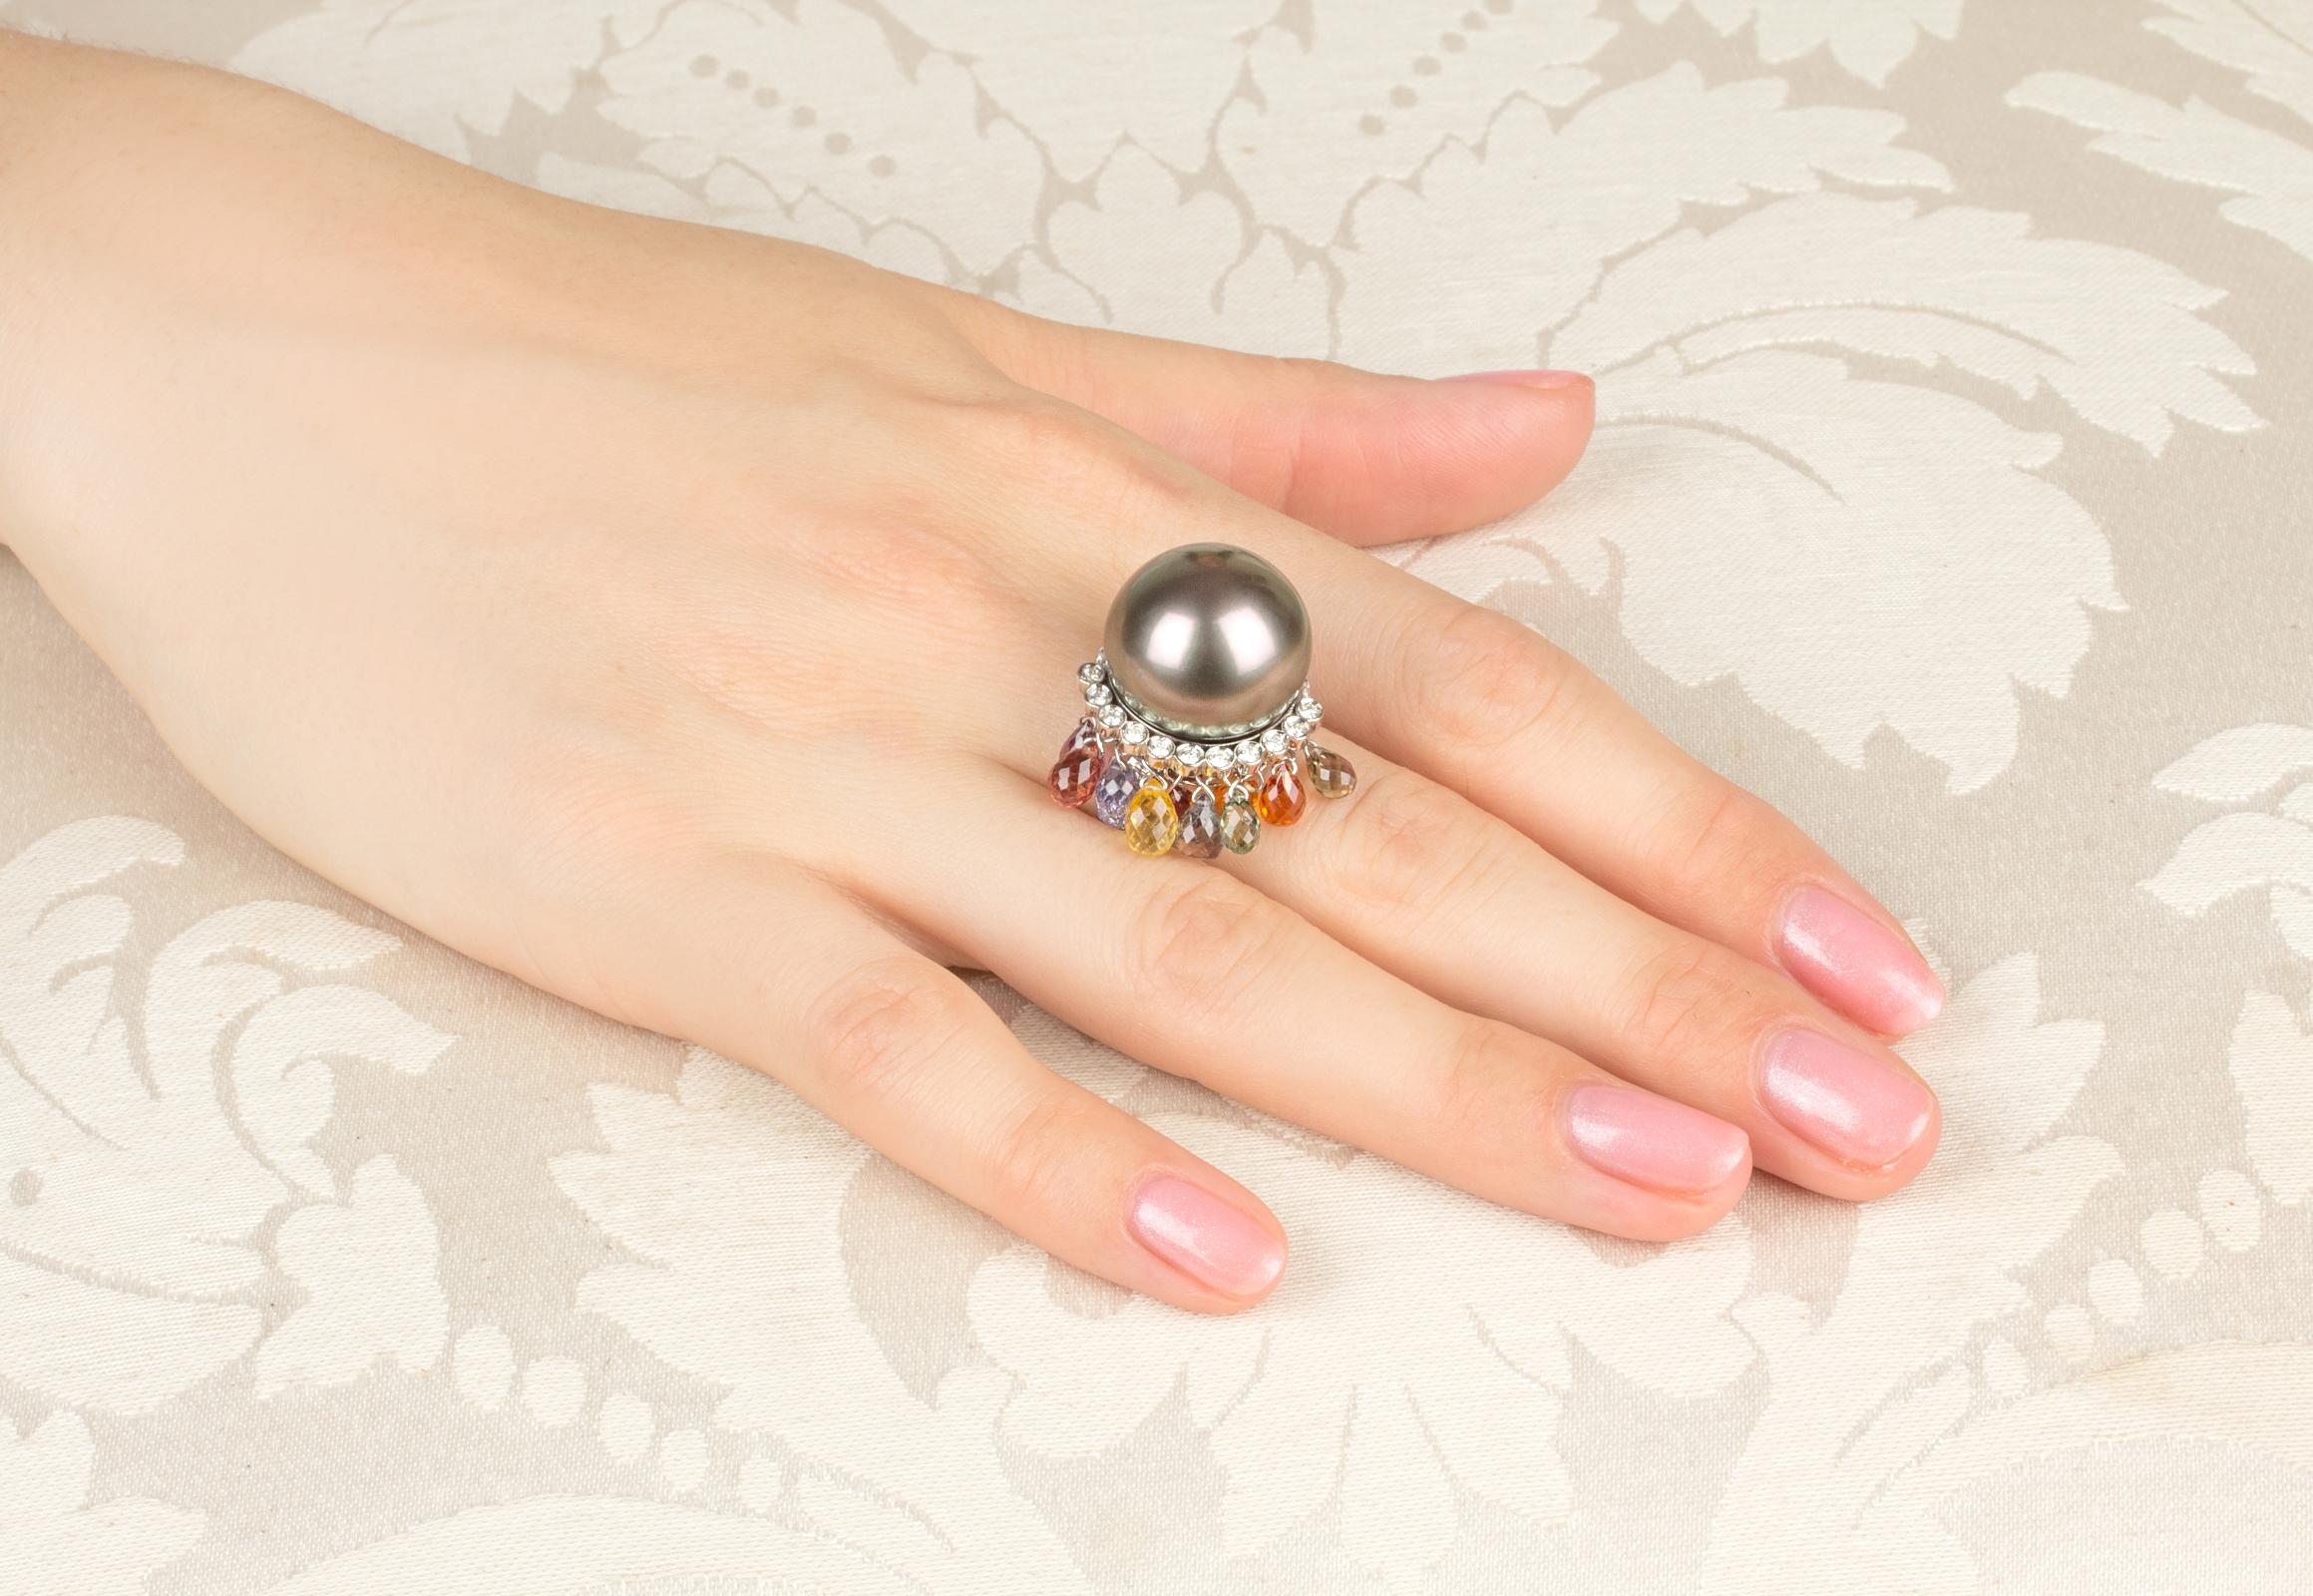 This Tahitian pearl and diamond ring features a particularly large and attractive pearl of 17.5/18mm diameter. The pearl is untreated. It displays a fine nacre and its natural color and luster have not been enhanced in any way. The pearl is perched